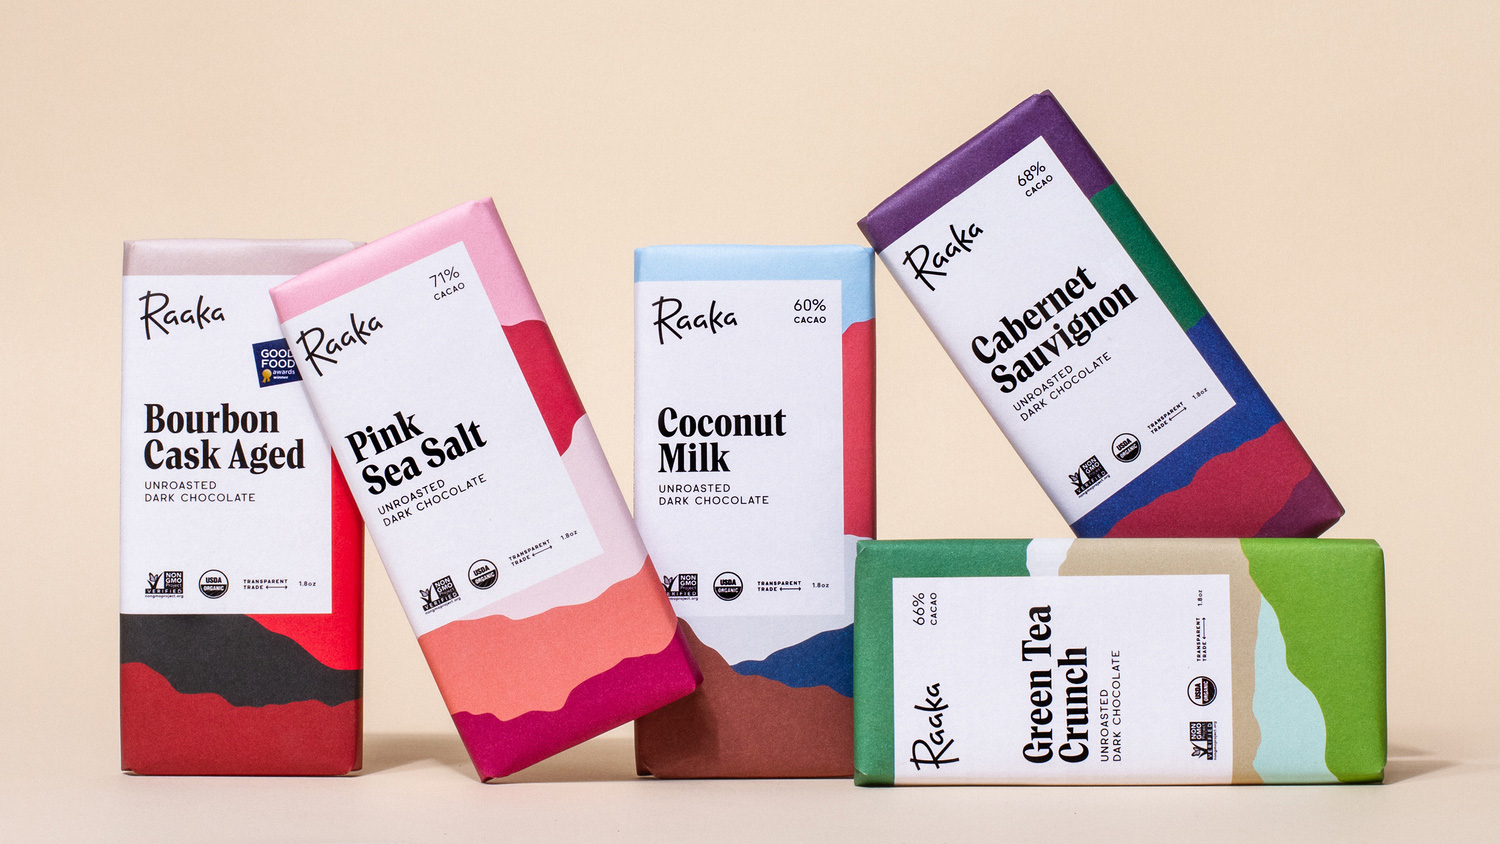 New Logo and Packaging for Raaka by Andrea Trabucco-Campos and Simon Blockley